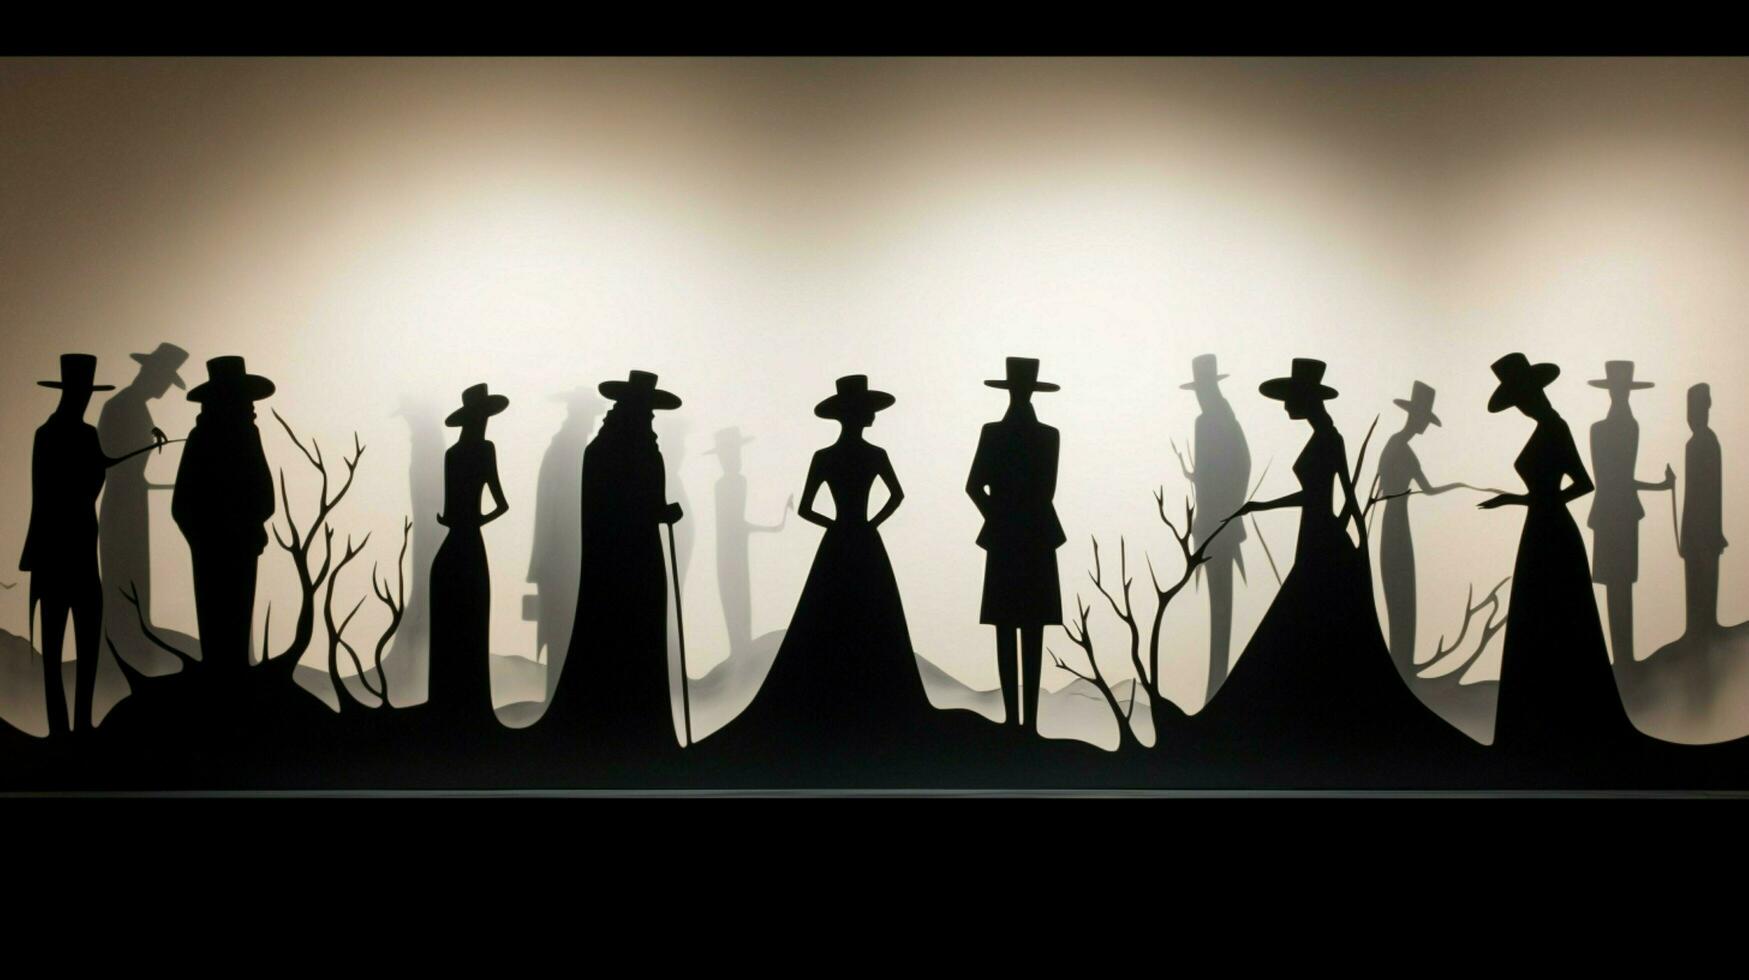 silhouetted figures evoke emotion and abstract imagination photo